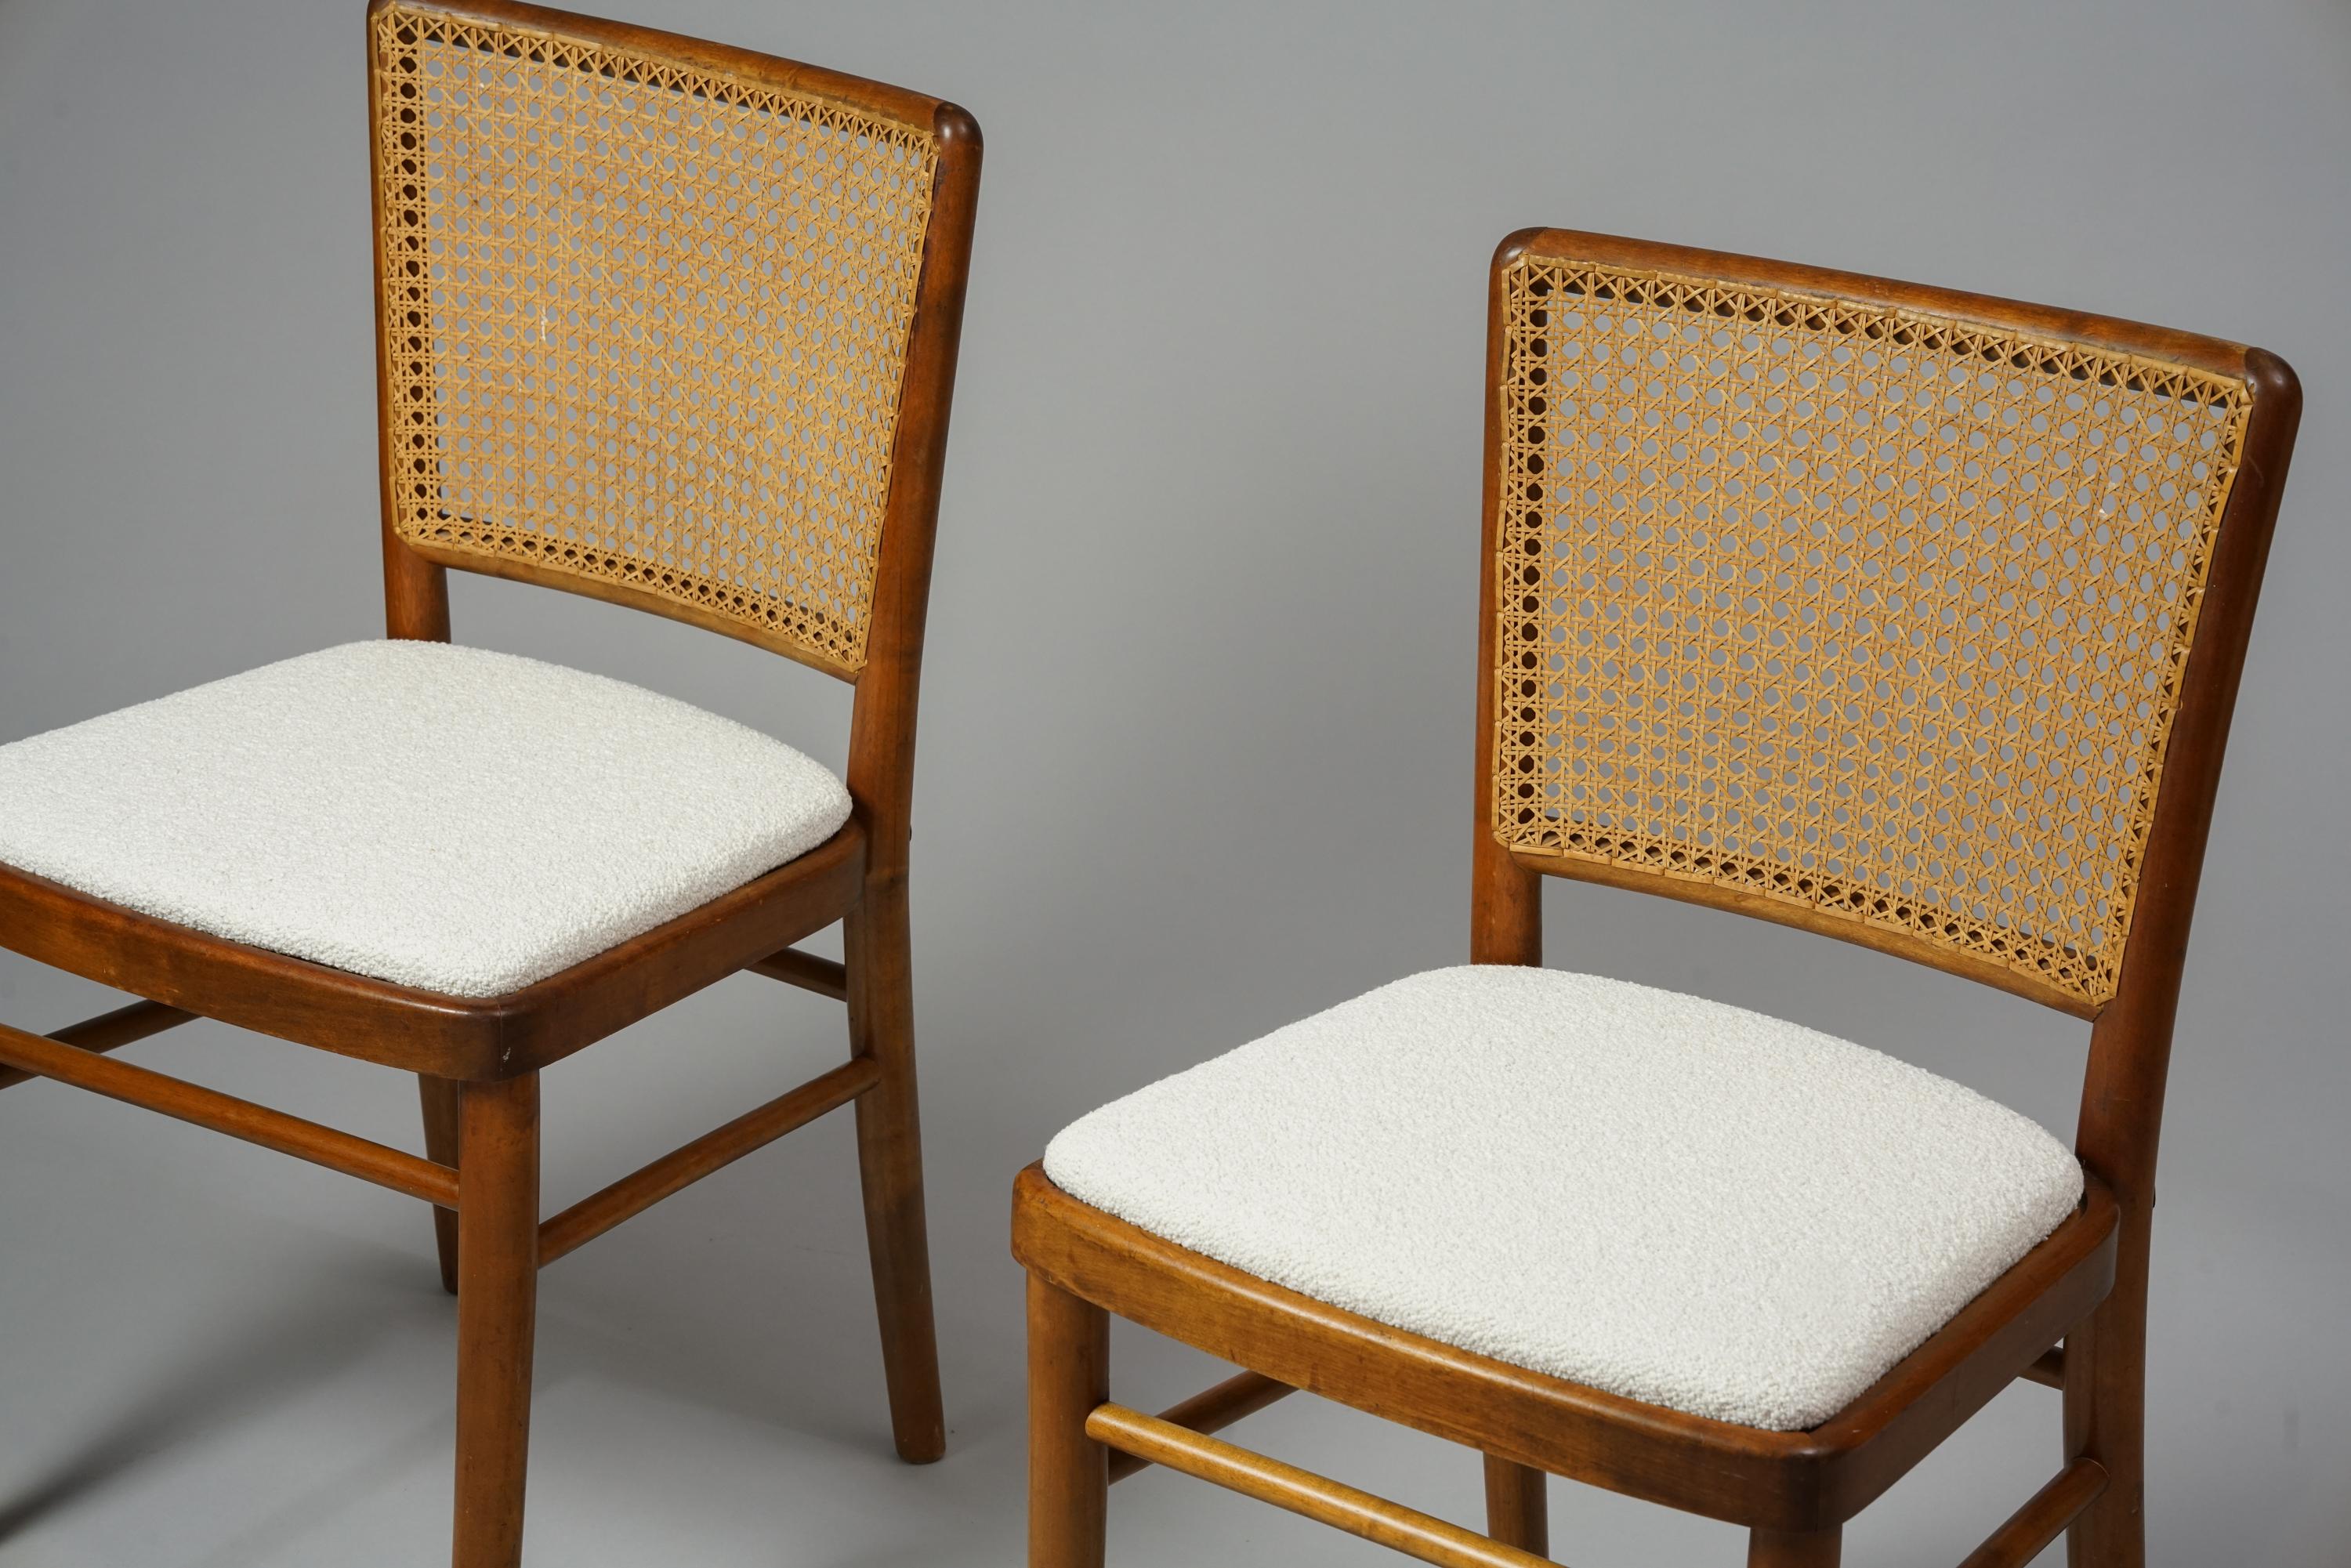 Scandinavian Modern set of two rattan & birch chairs from the 1940s/1950s, produced by Wilhelm Schauman and attributed to Werner West. Birch frame, rattan backrest, re-upholstered with with high quality Lauritzon´s Orsetto fabric. Good vintage